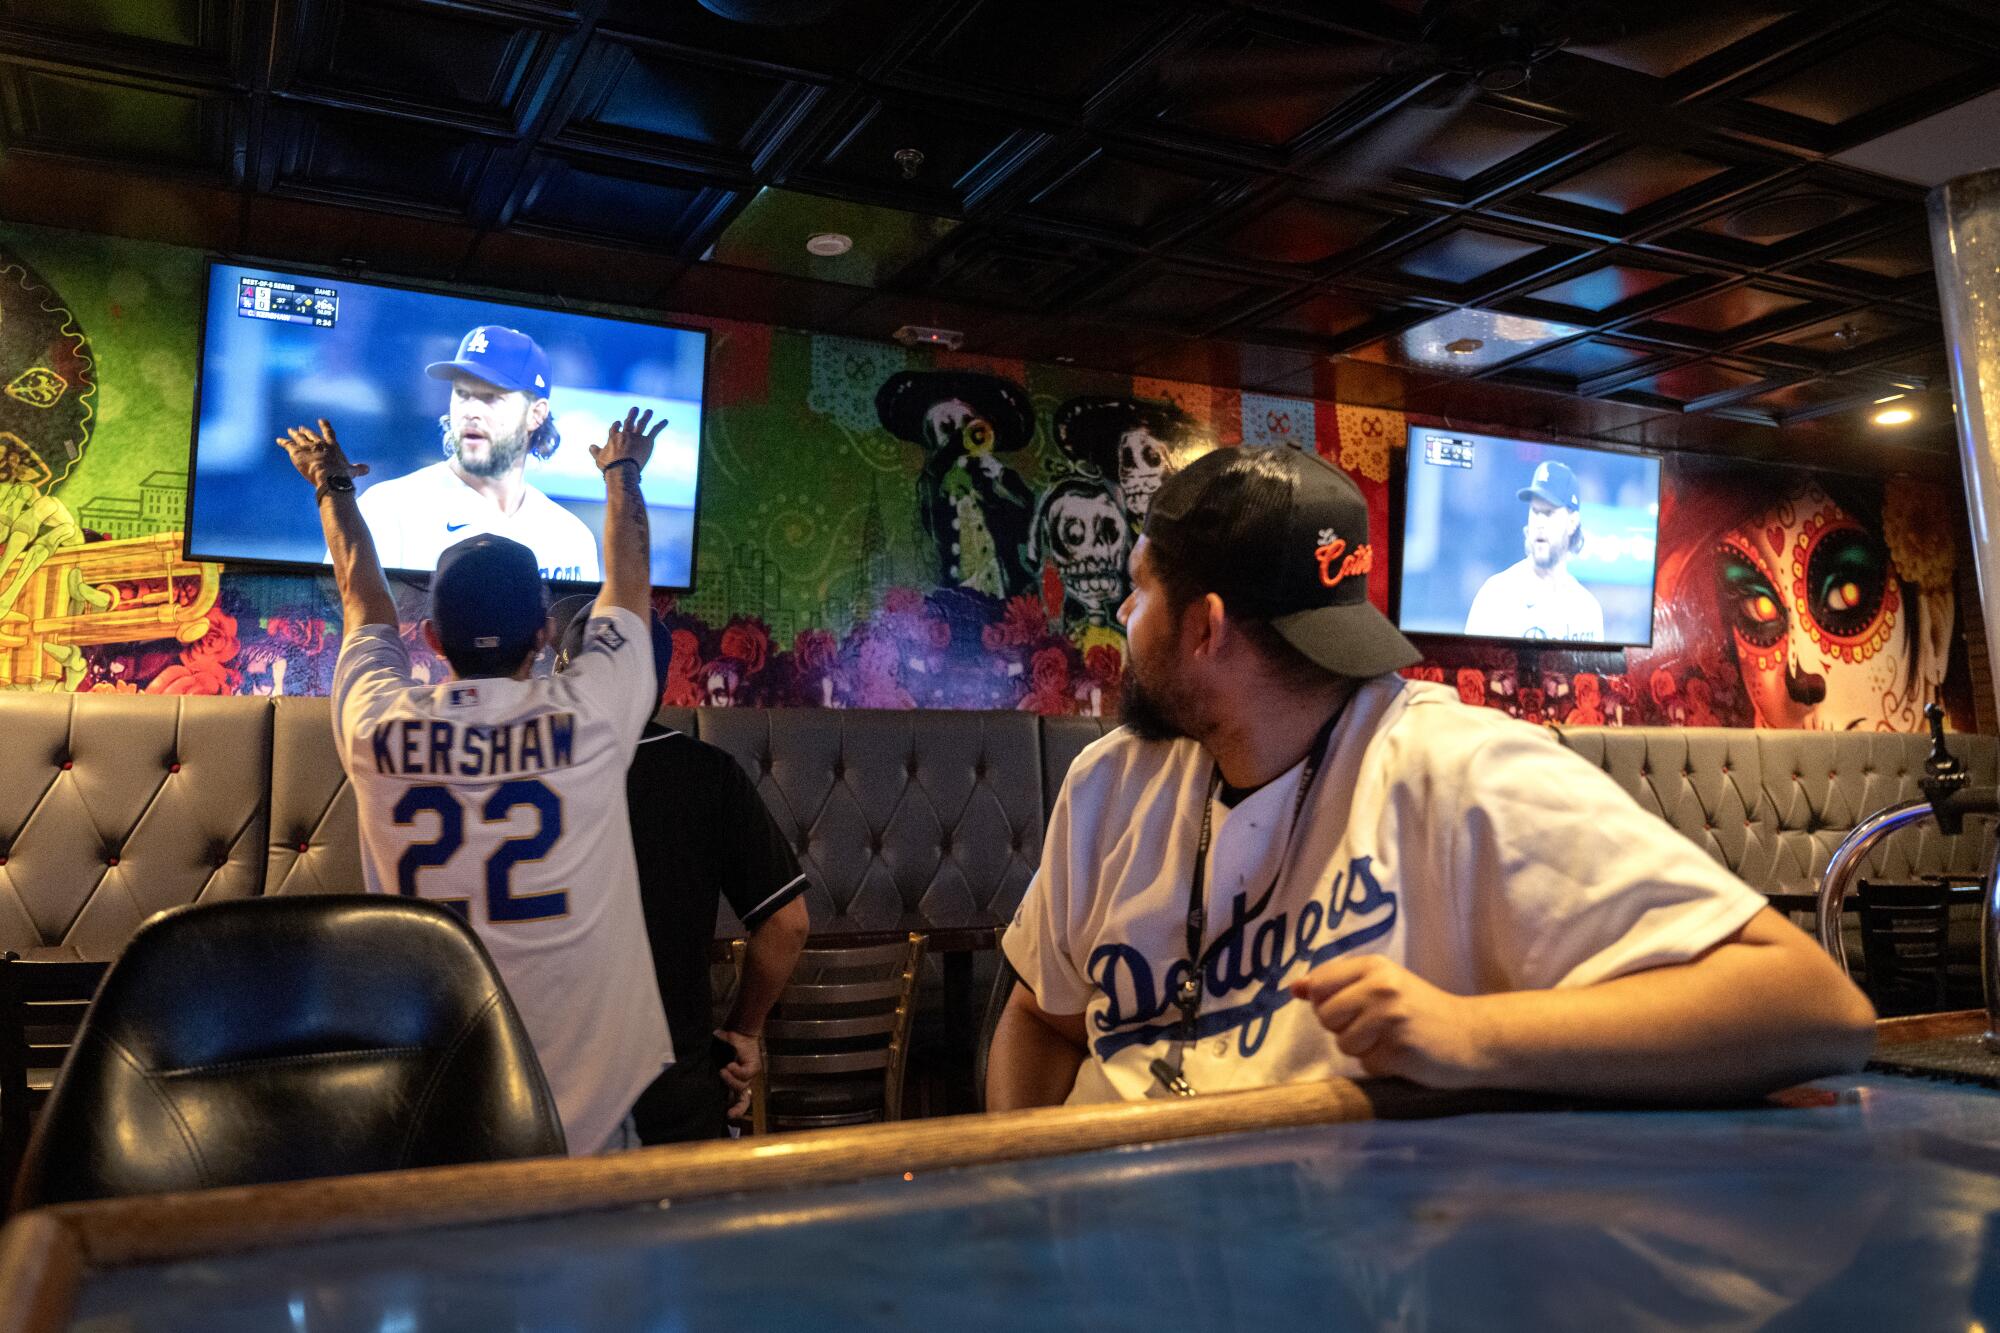 Two people in Dodgers shirts watch the game at a bar.